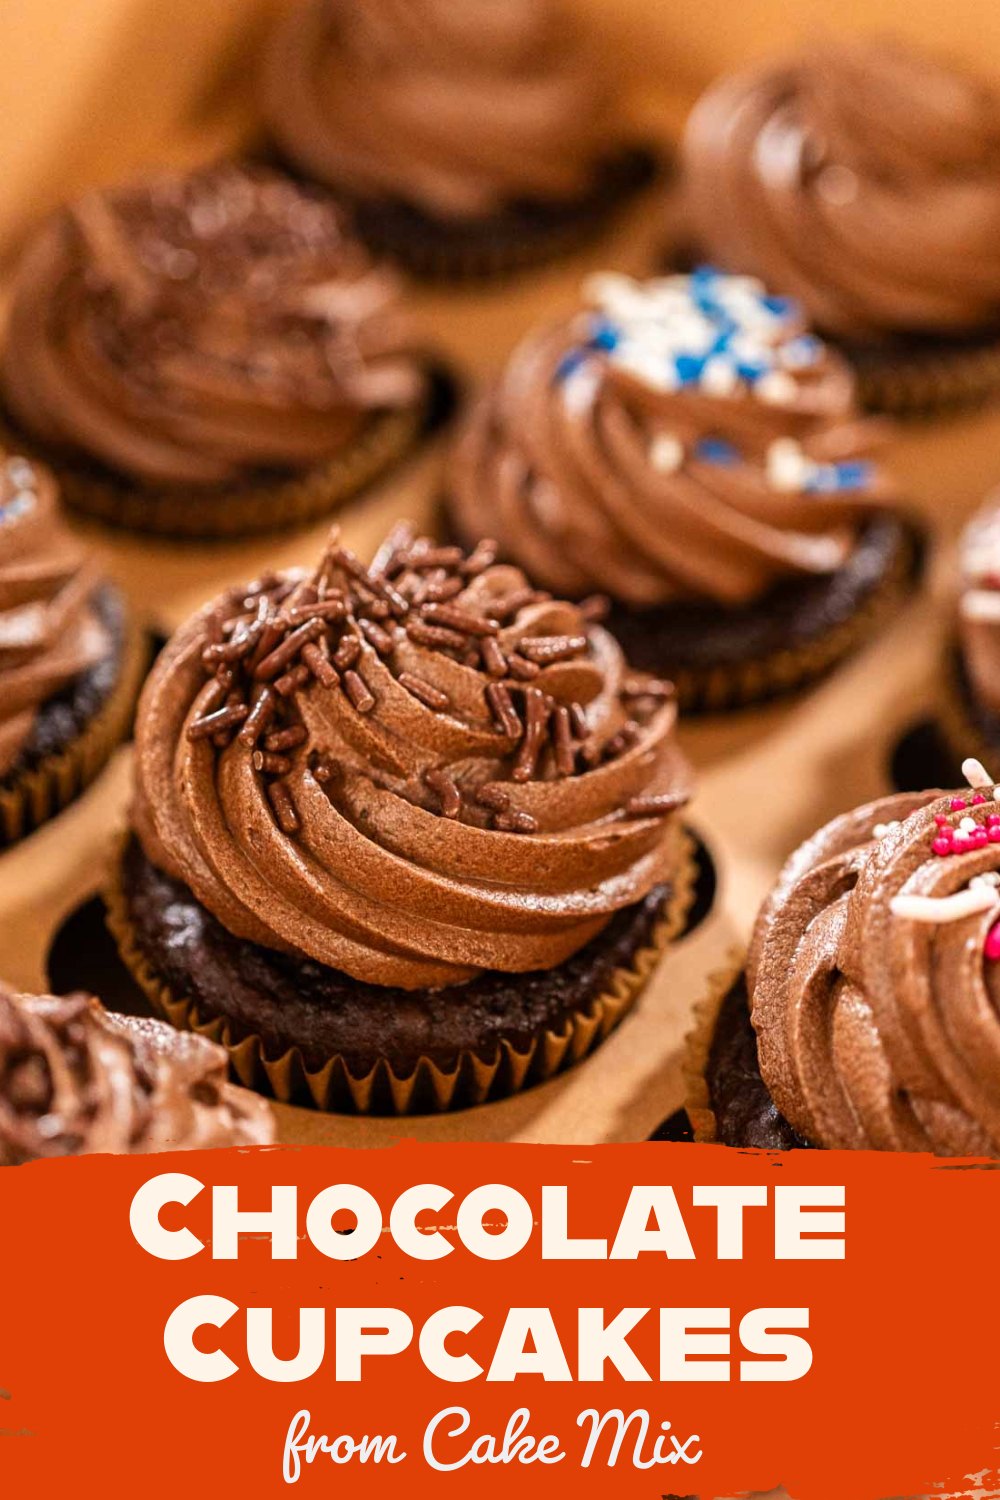 Fancy Chocolate Cupcakes From Cake Mix